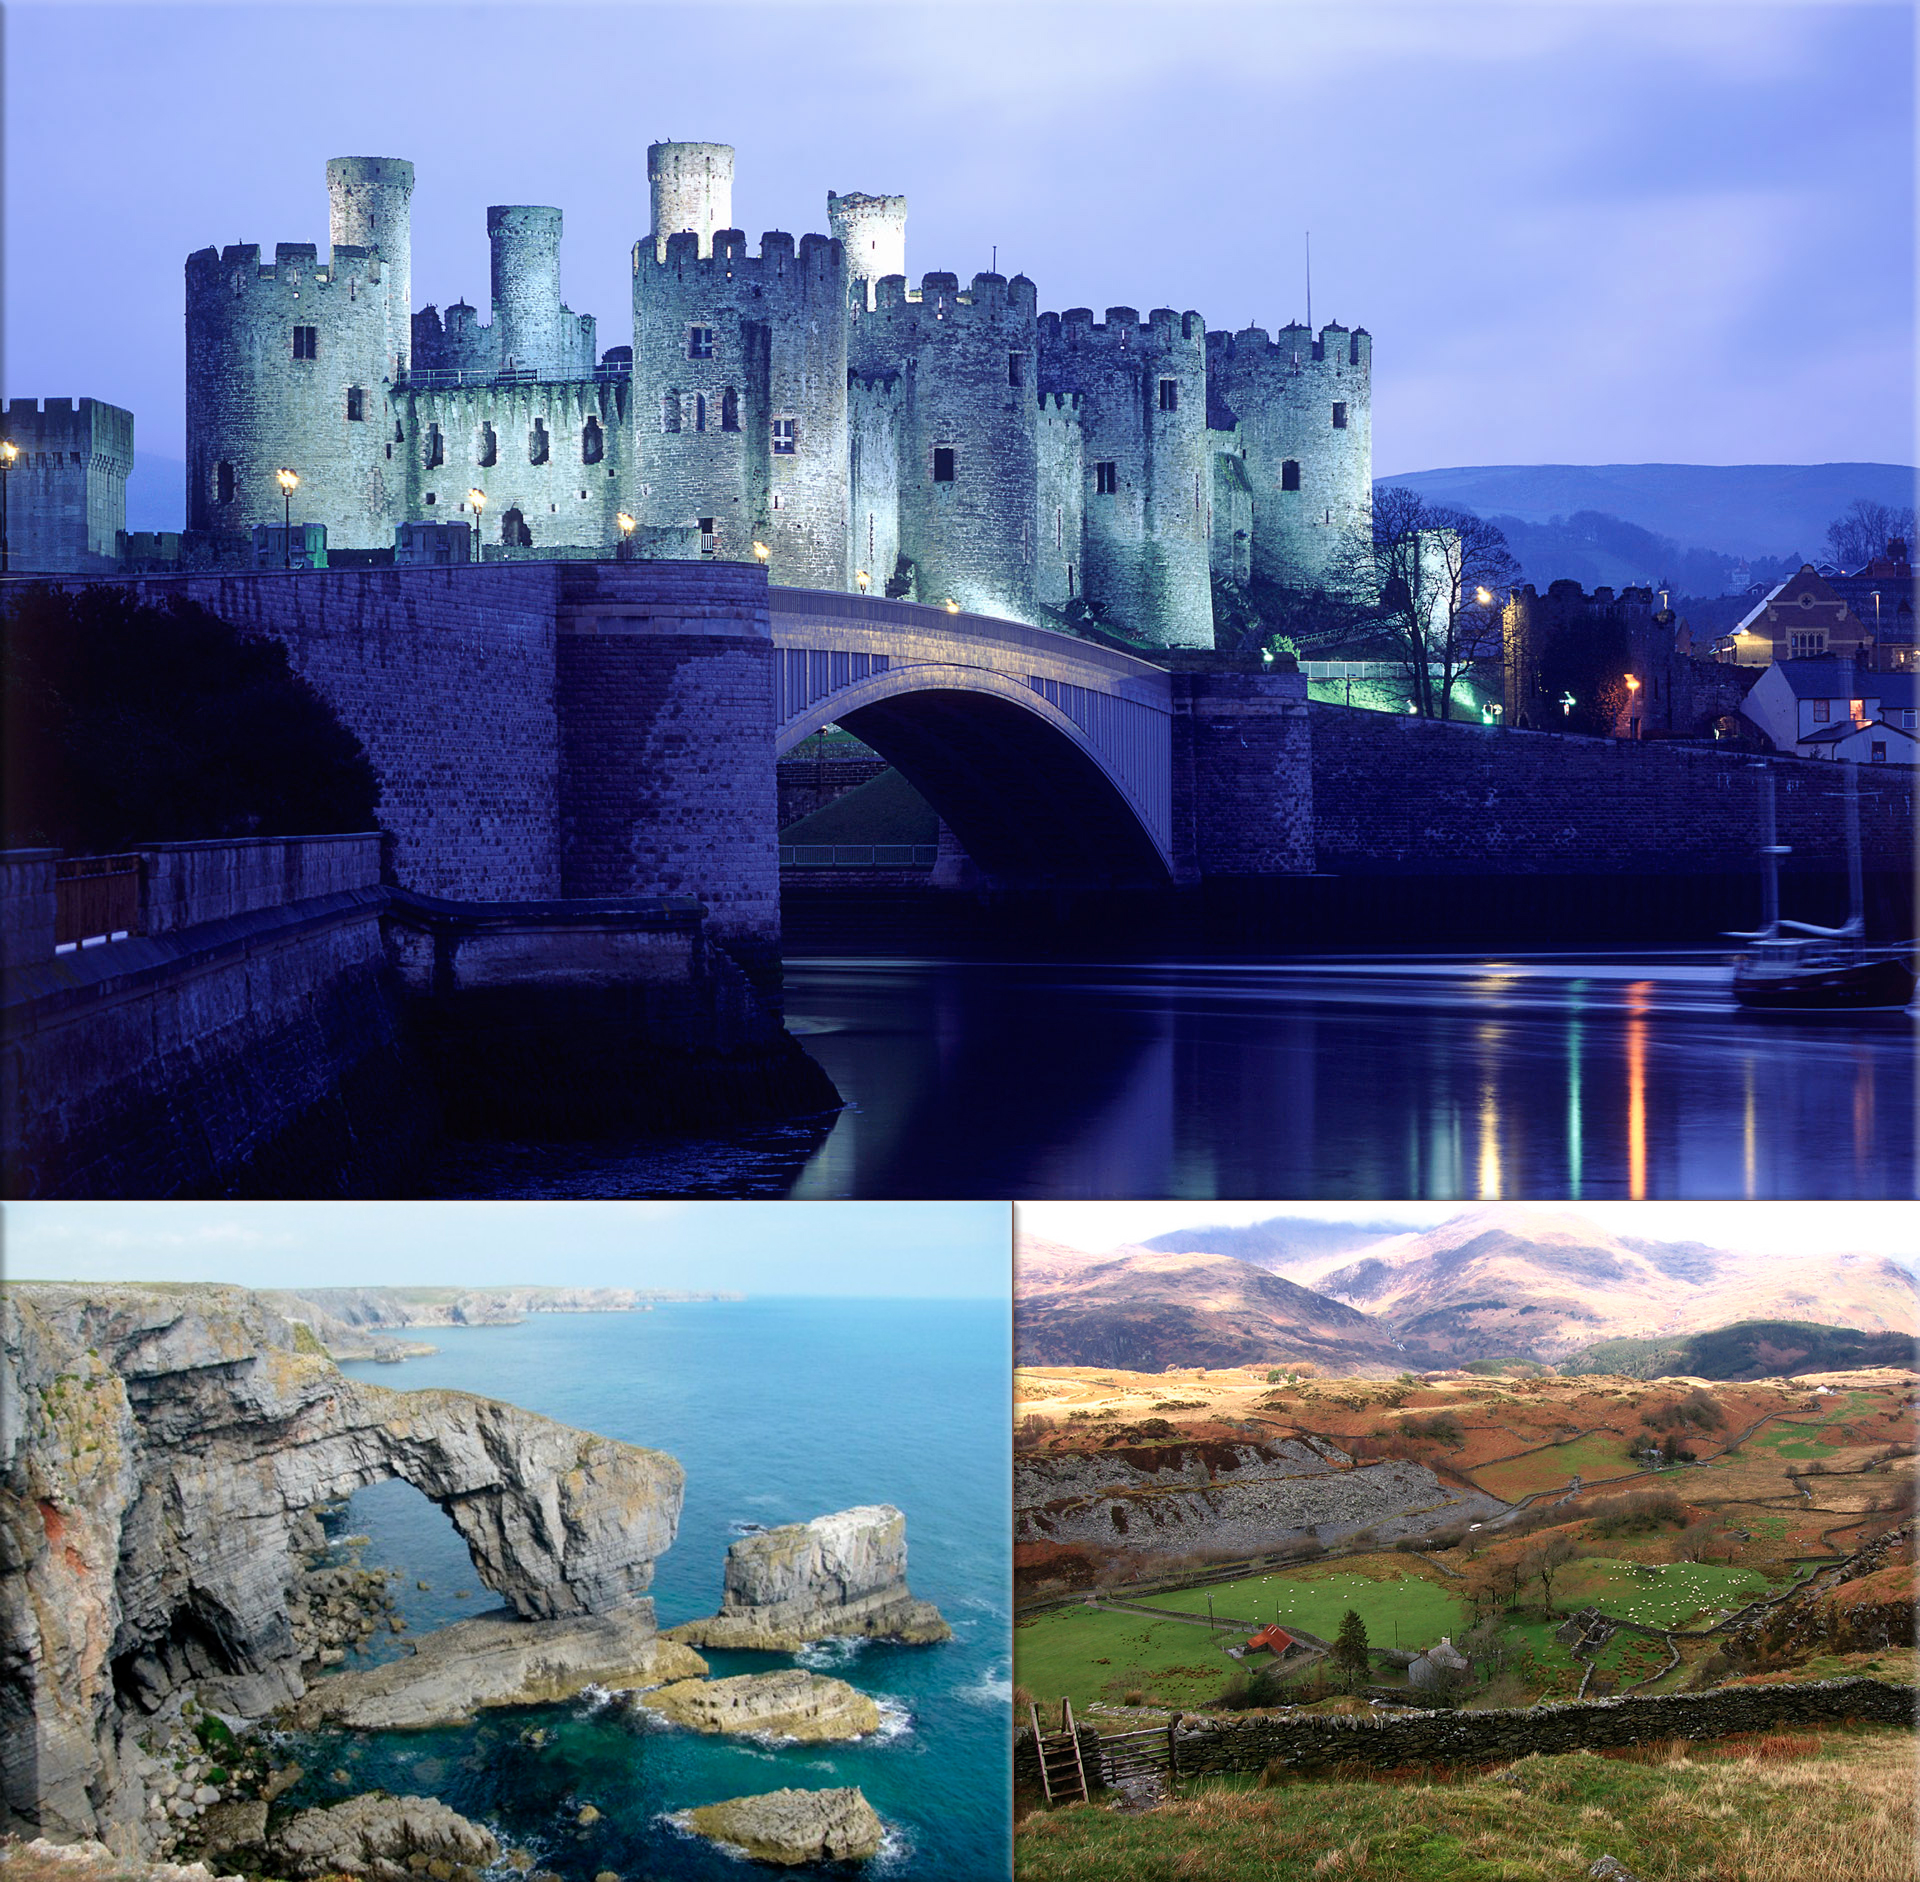 Wales: Conwy Castle, north coast of Wales ● The Green bridge of Wales ● Welsh landscape with sheep